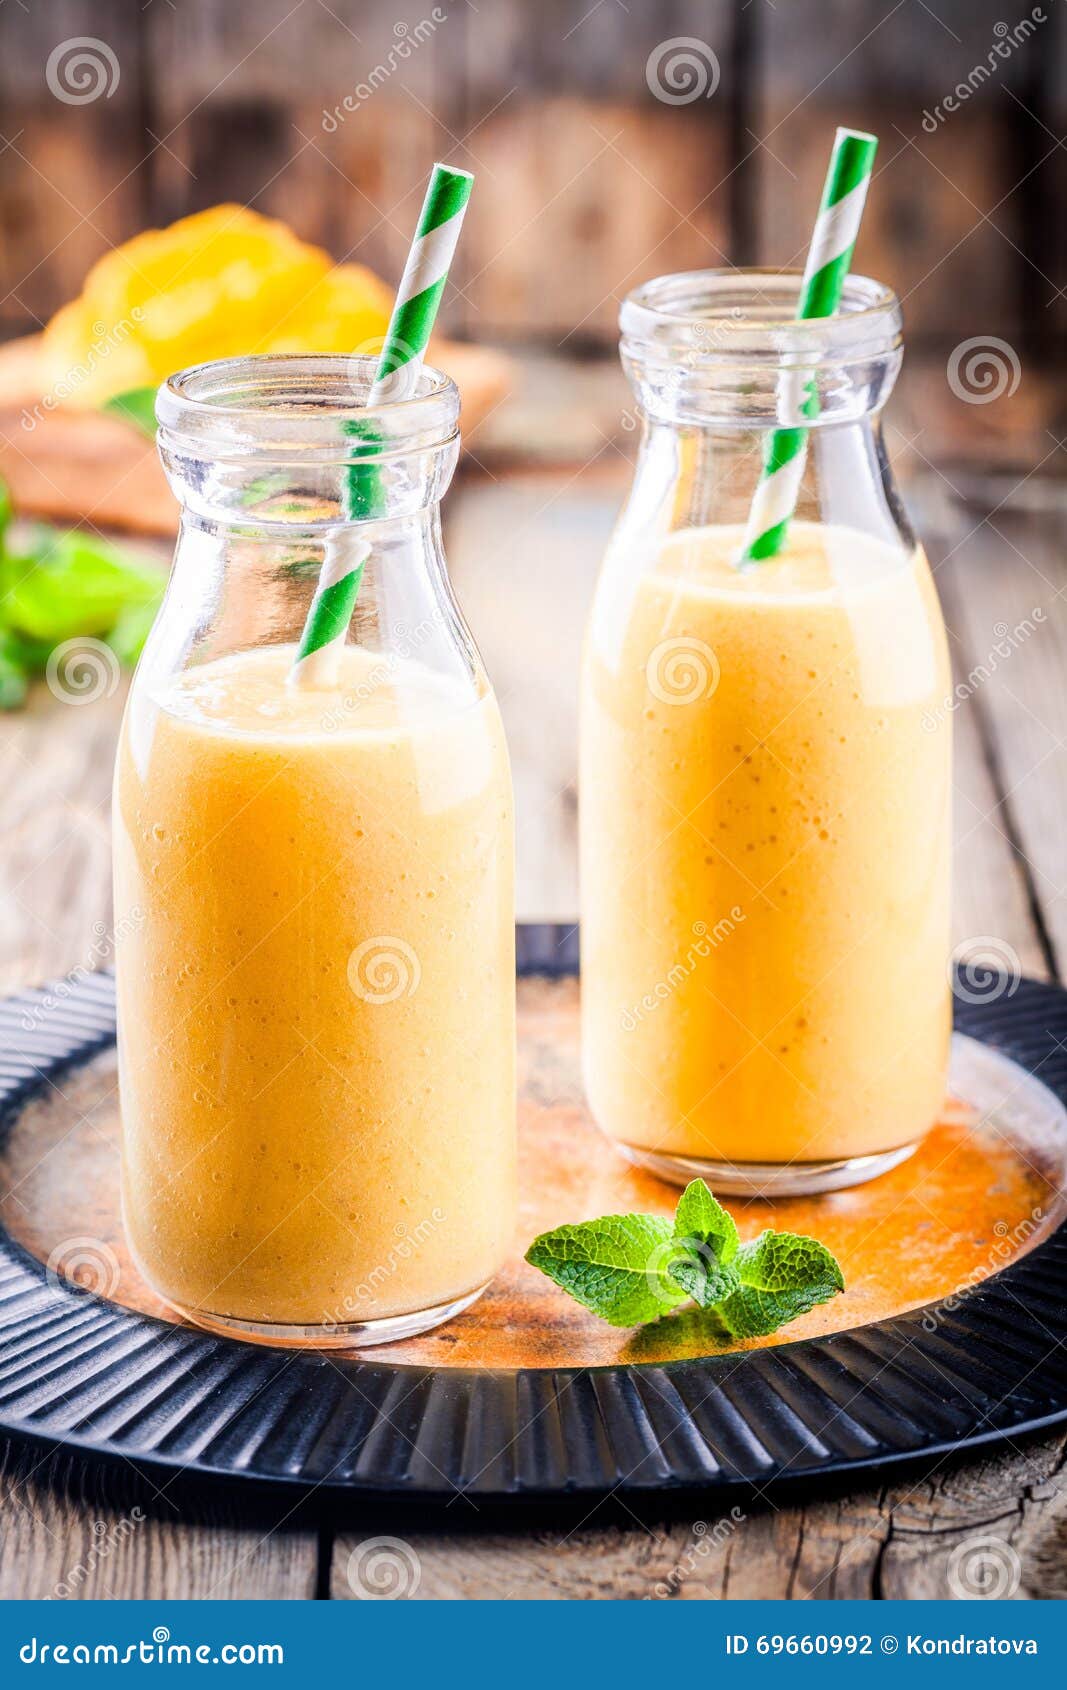 49,233 Smoothies Bottle Images, Stock Photos, 3D objects, & Vectors